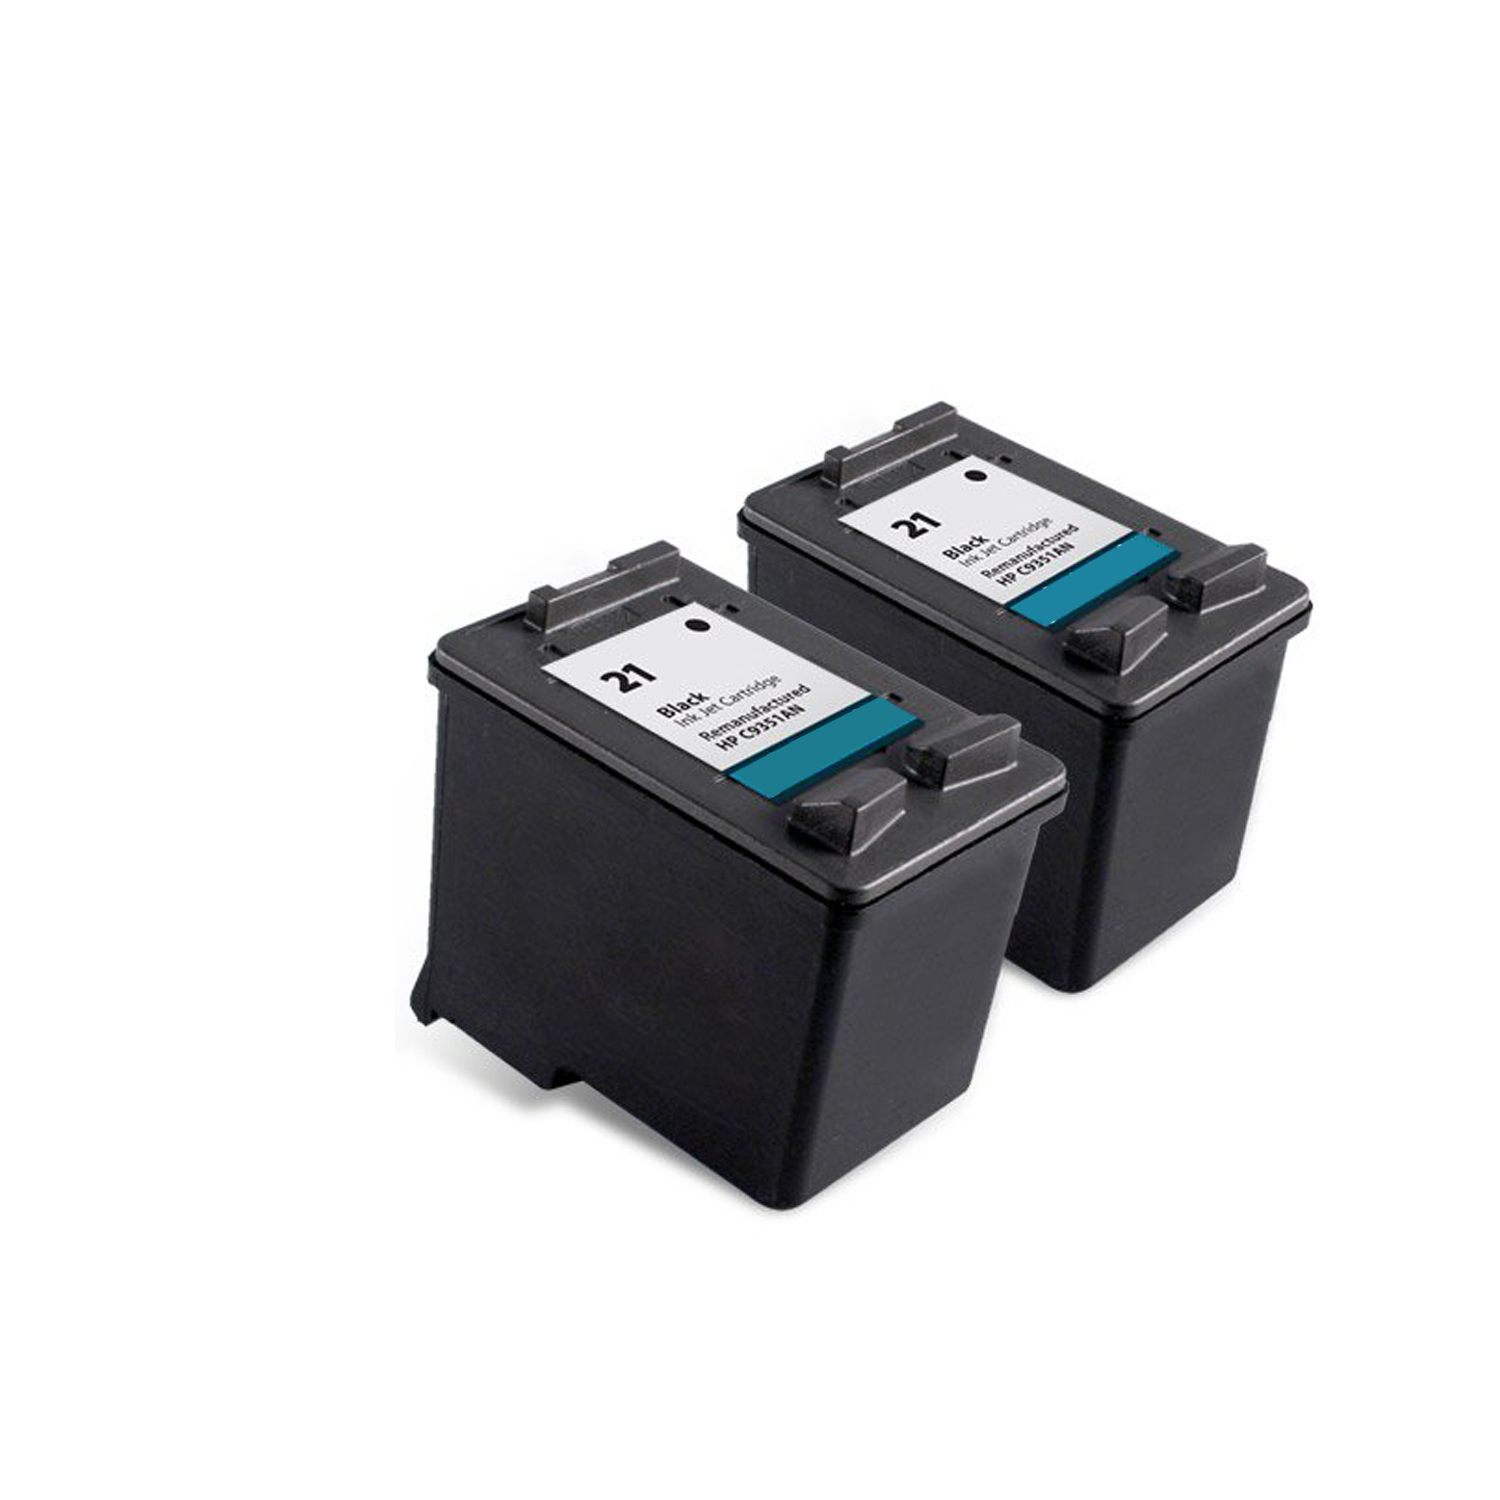 Printronic Remanufactured Ink Cartridge Replacement For Hp 21 C9351an 2 Black 2 Pack Awesome 5833